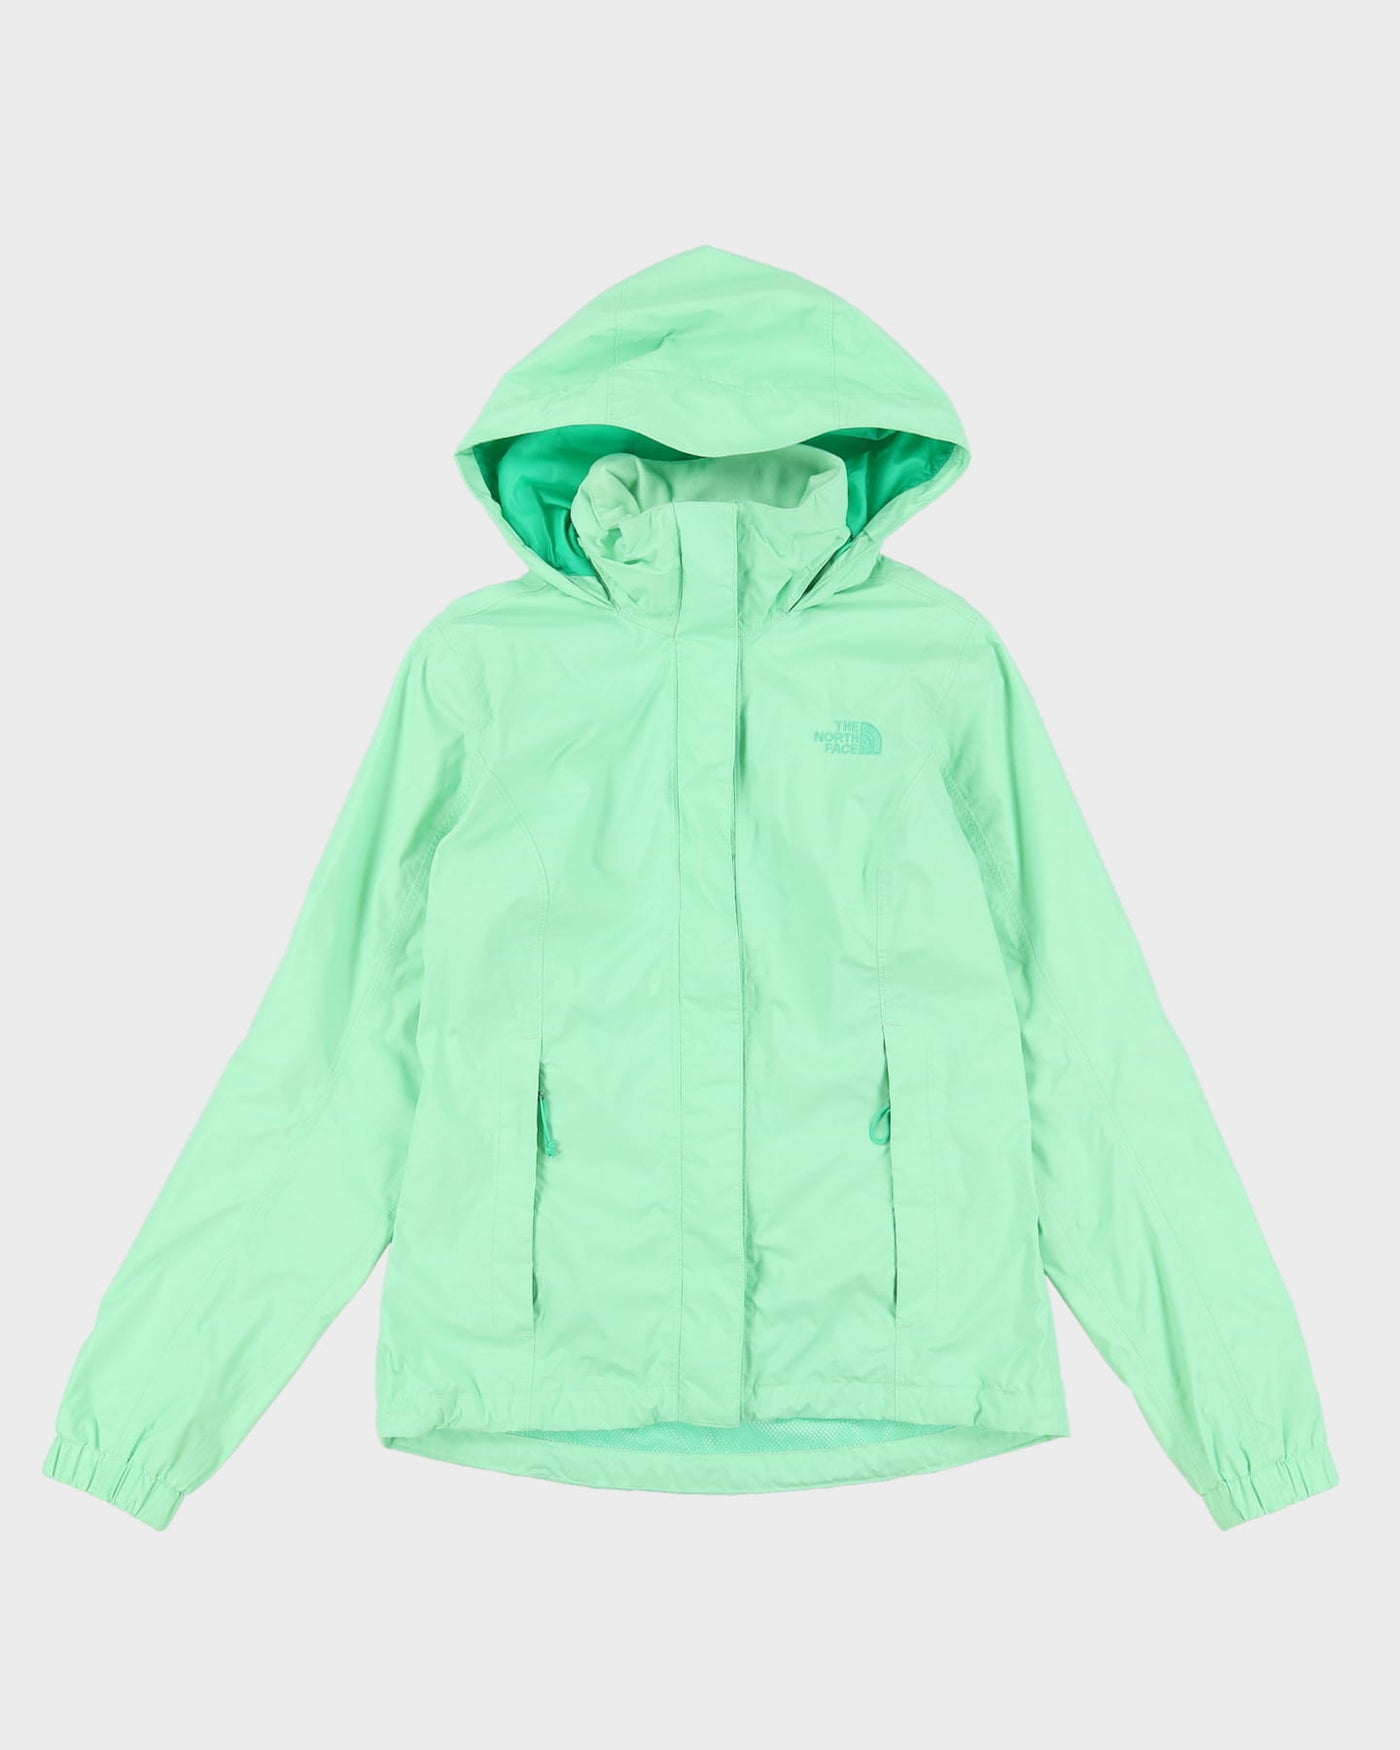 The North Face Green Hooded Anorak Jacket - XS